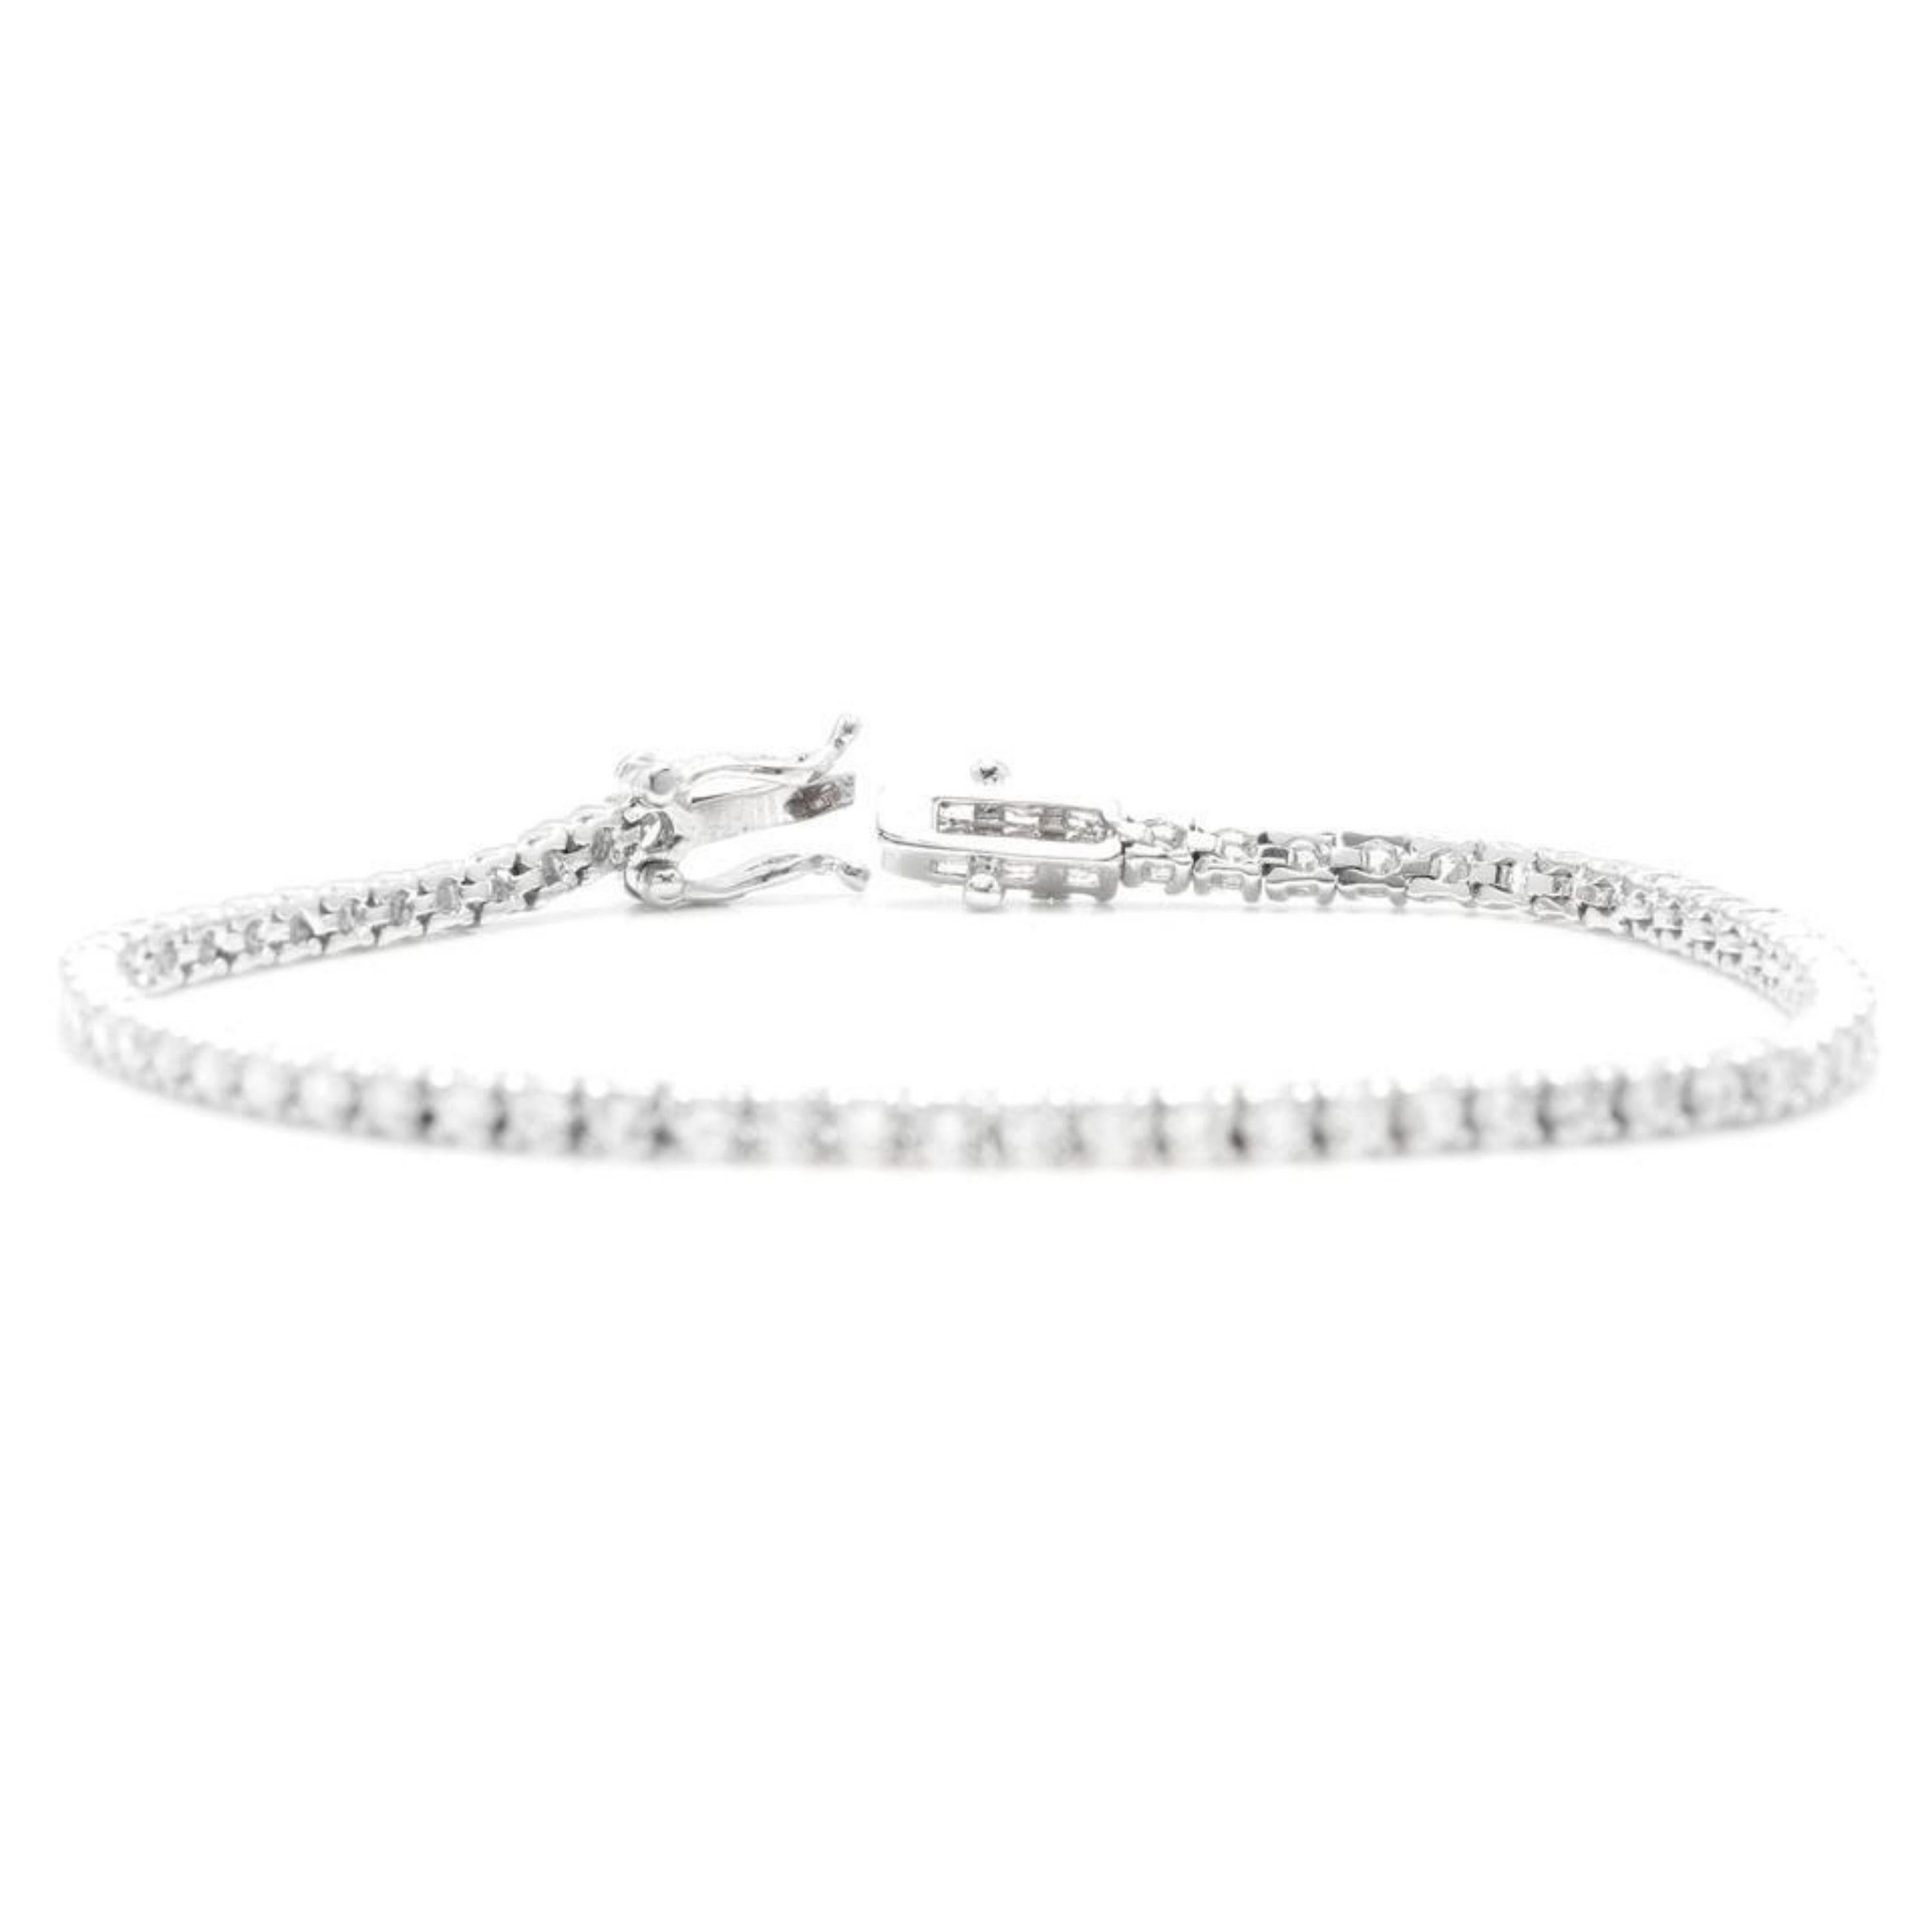 Very Impressive 2.70 Carats Natural Diamond 14K Solid White Gold Bracelet

STAMPED: 14K

Total Natural Round Diamonds Weight: Approx. 2.70 Carats (color H / Clarity SI1-SI2)

Bracelet Length is: 7 inches

Width: 2.4mm

Bracelet total weight: Approx.